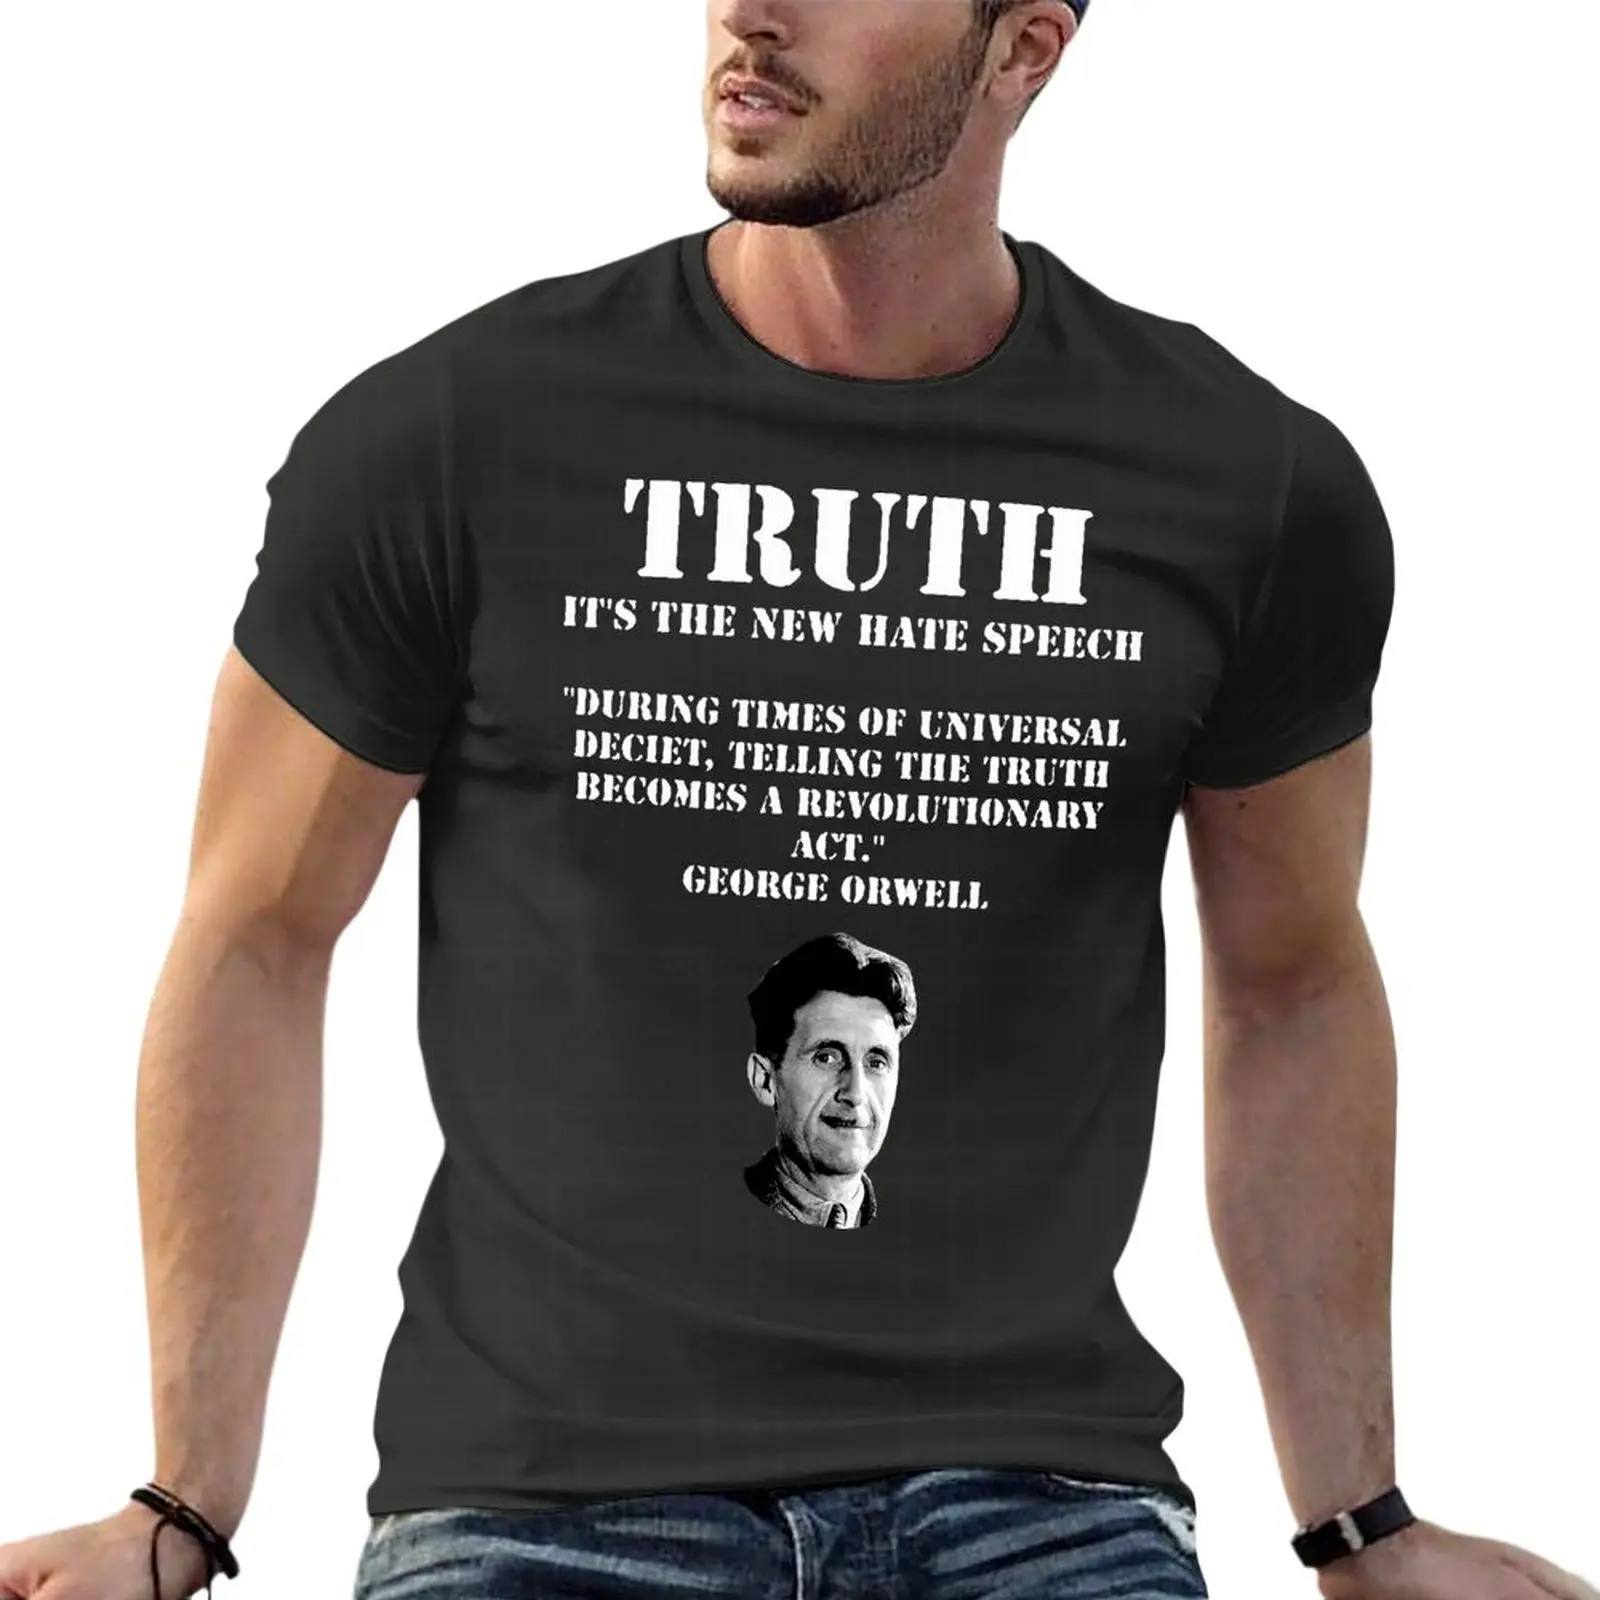 

George Orwell Free Speech Truth Quote Oversize T-Shirt Printed Mens Clothing 100% Cotton Streetwear Plus Size Tops Tee